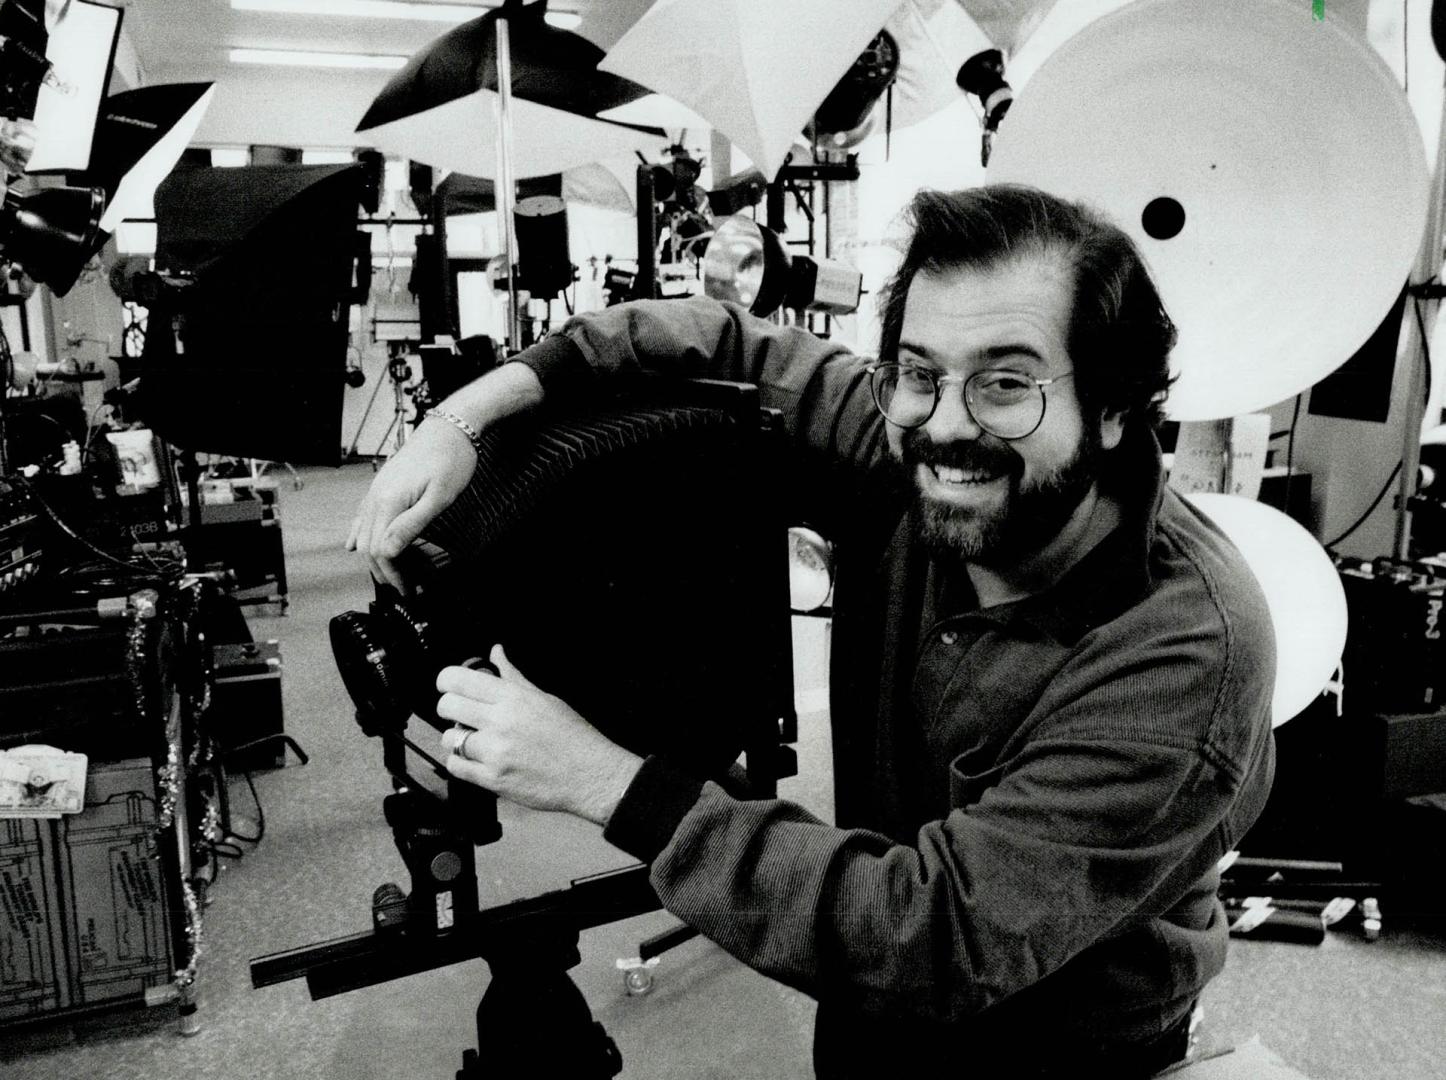 Cameraman: Ron Silverstein, who started as a commercial photographer, found retailing more exciting than taking pictures of hardware and plumbing supplies